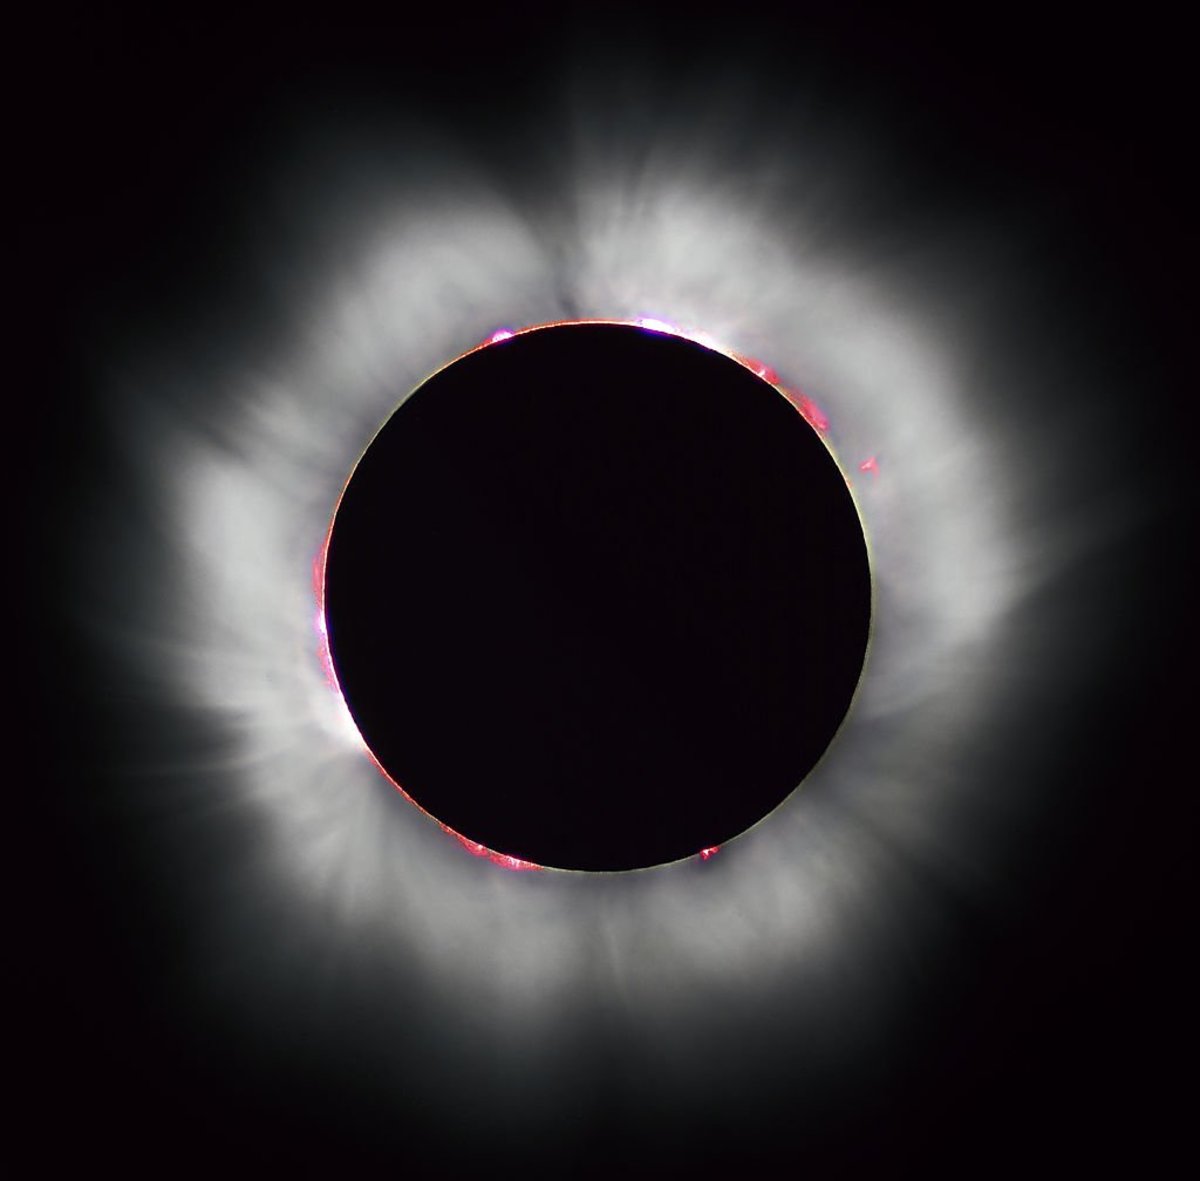 How to photograph a solar eclipse: Full eclipse in its totality.